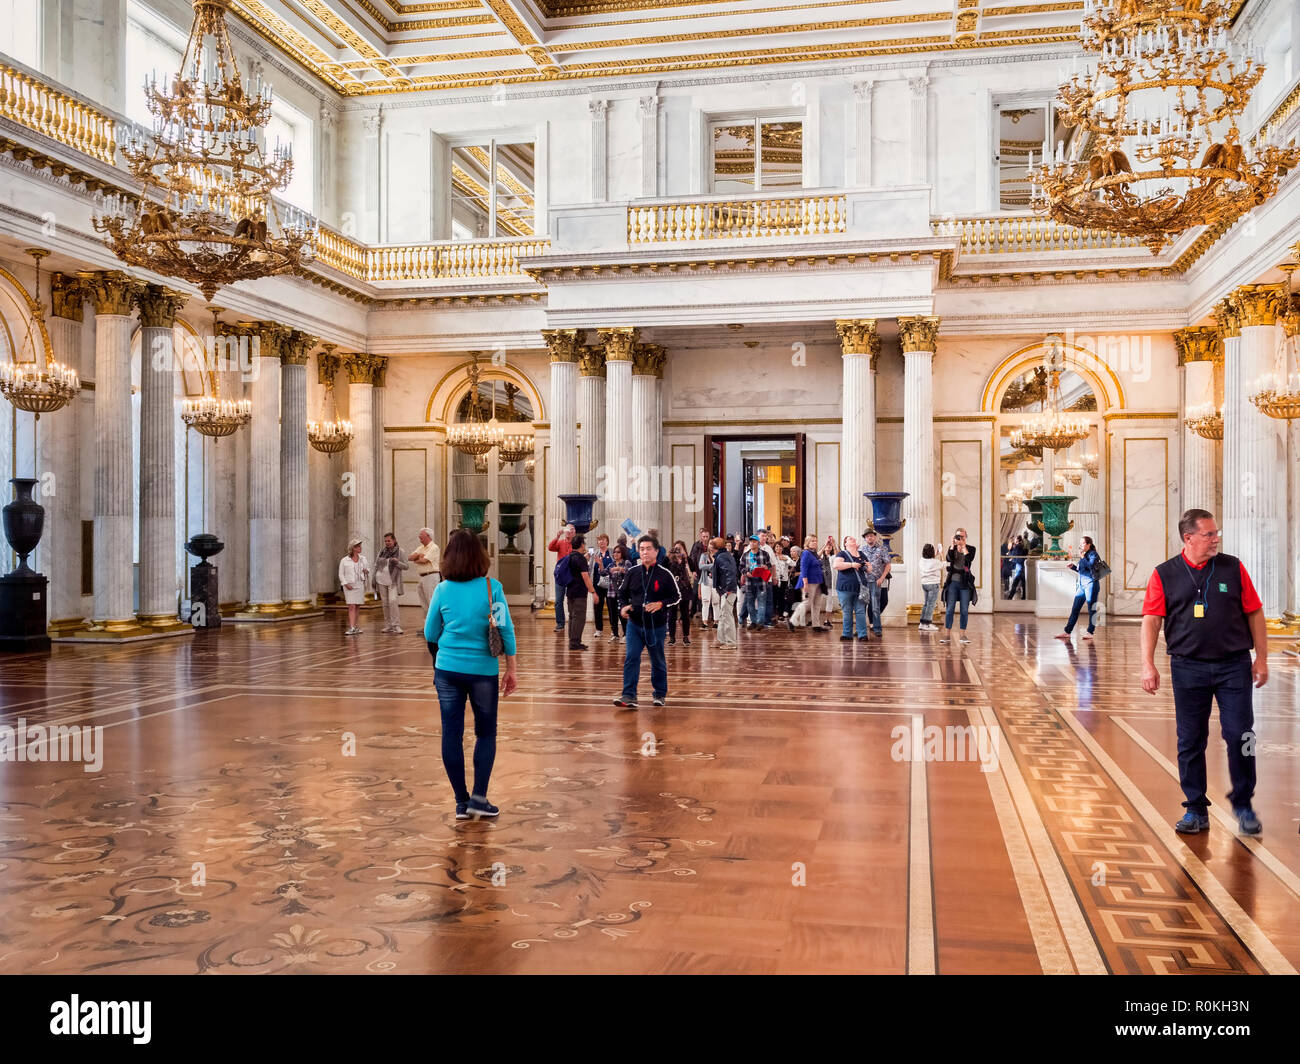 19 September 2018: St Petersburg, Russia - Visitors in St George's Hall, or the Great Throne Room, in the Winter Palace, part of the Hermitage Museum. Stock Photo